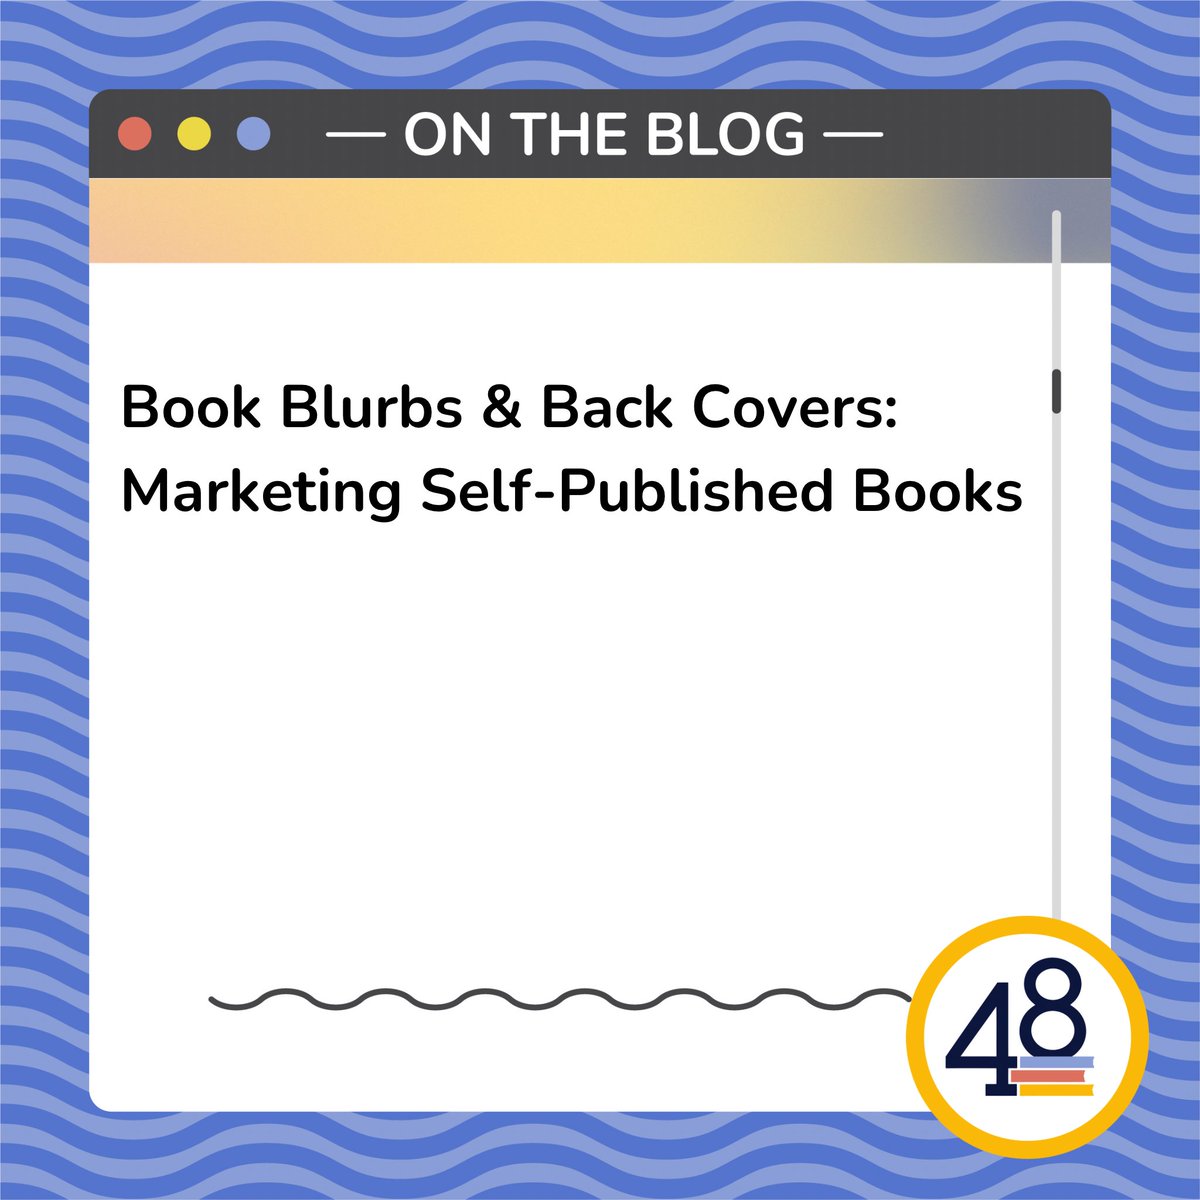 While the front cover of your book is important for first impressions, the back book cover is also crucial component of a book's overall design and marketing strategy. Learn what to include on your back cover, in this week's blog post: hubs.ly/Q02xjmGS0

#blogpost #books